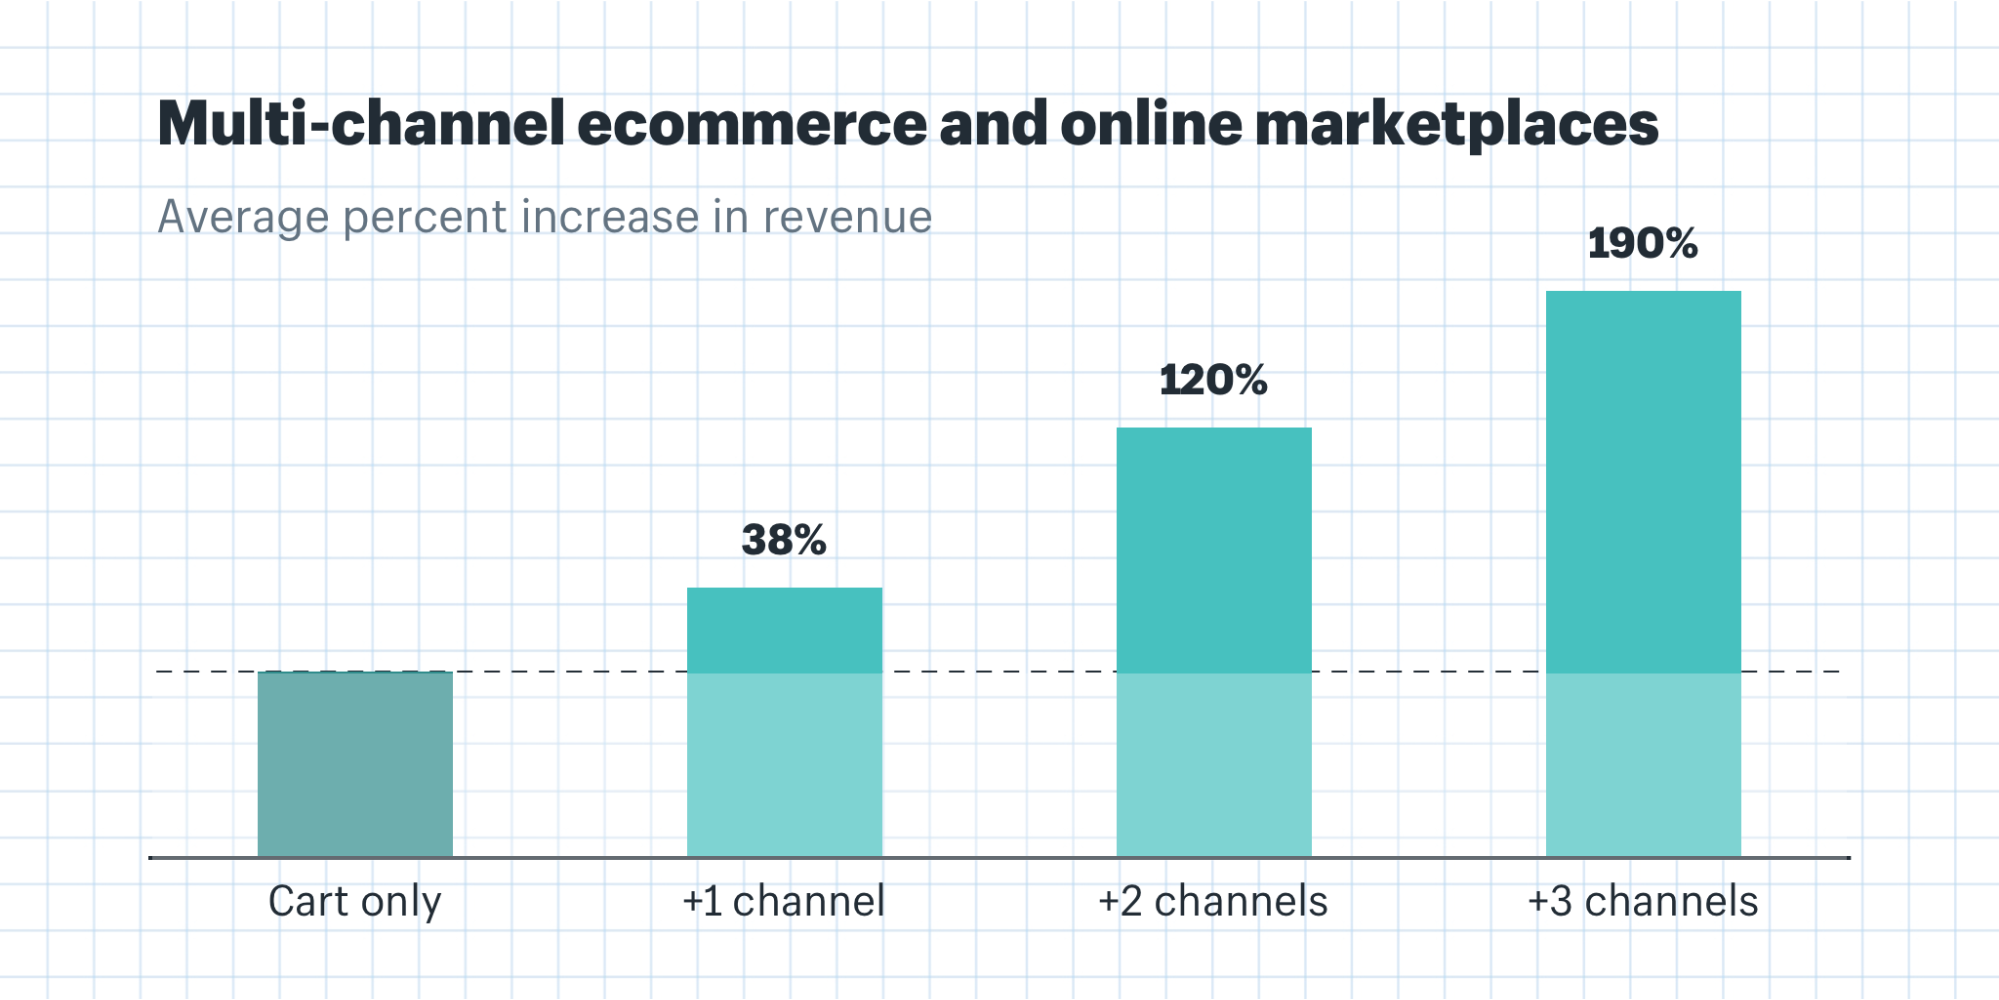 Multi-channel ecommerce and online marketplaces